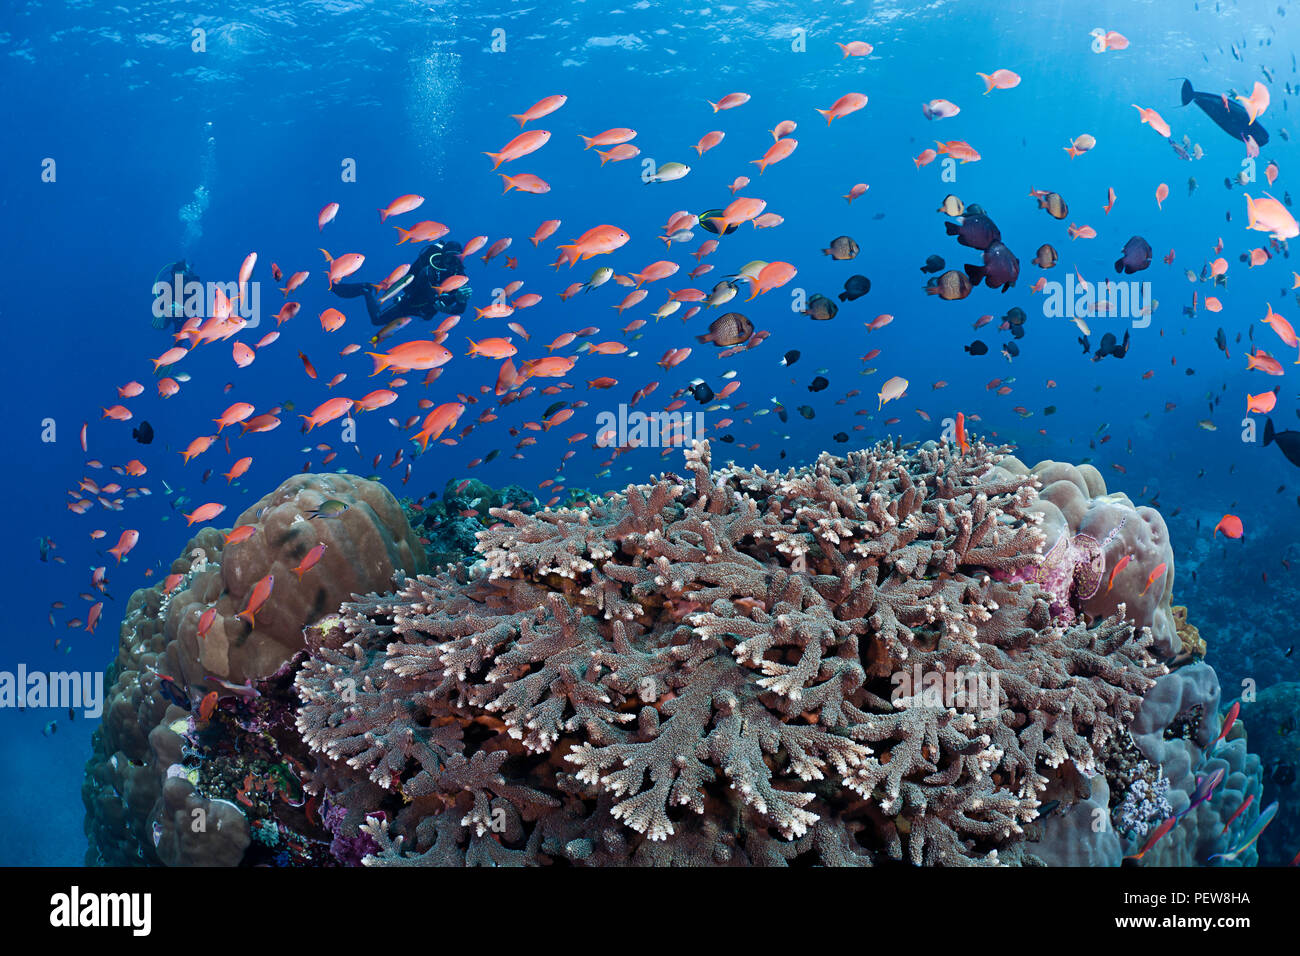 Hard corals, schooling anthias and other reef fish dominate this Indonesian reef scene with divers (MR), Crystal Bay, Nusa Penida, Bali Island, Indone Stock Photo